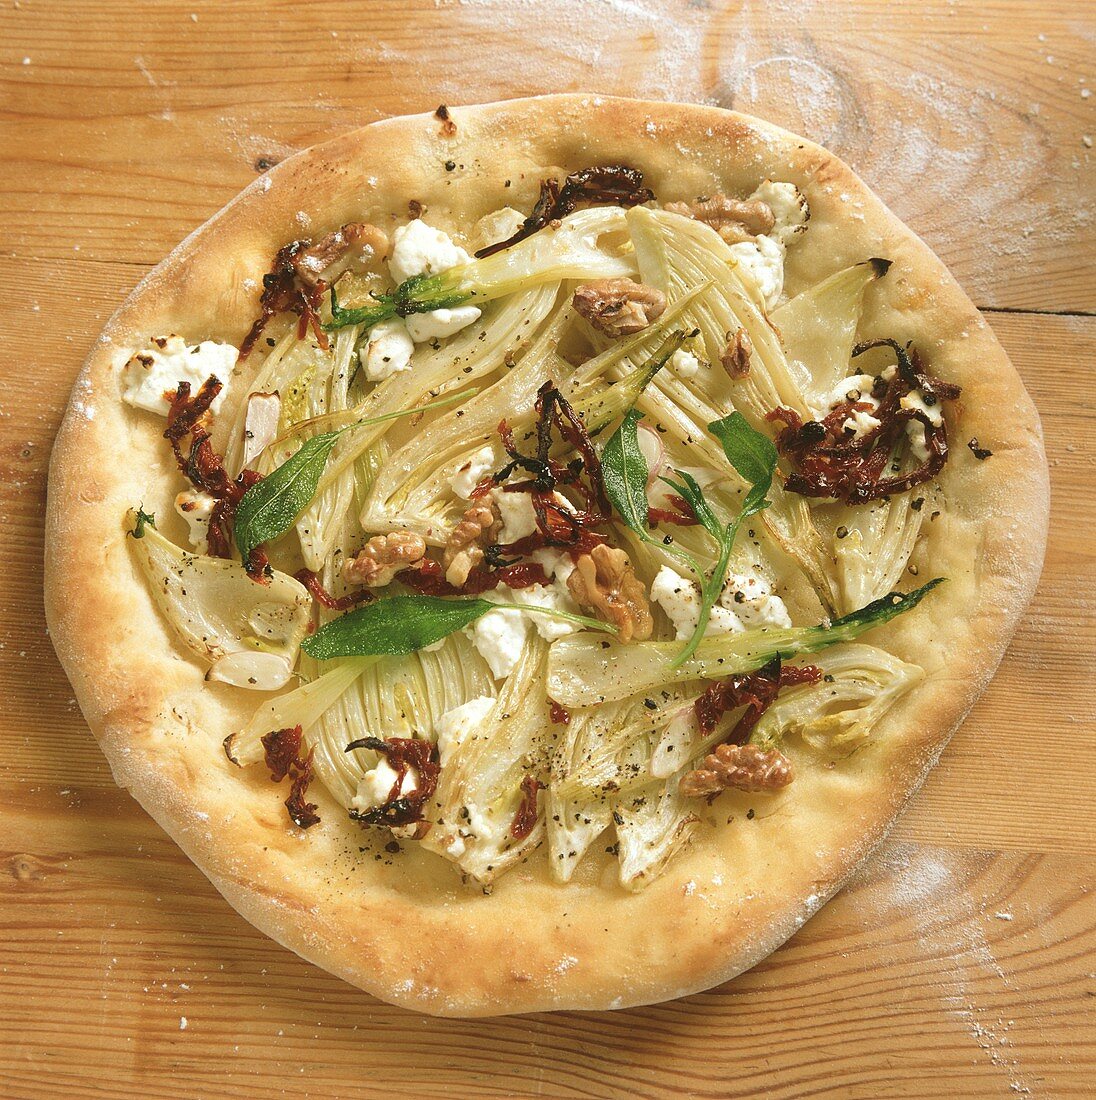 Fennel pizza with walnuts, goat's cheese, dried tomatoes